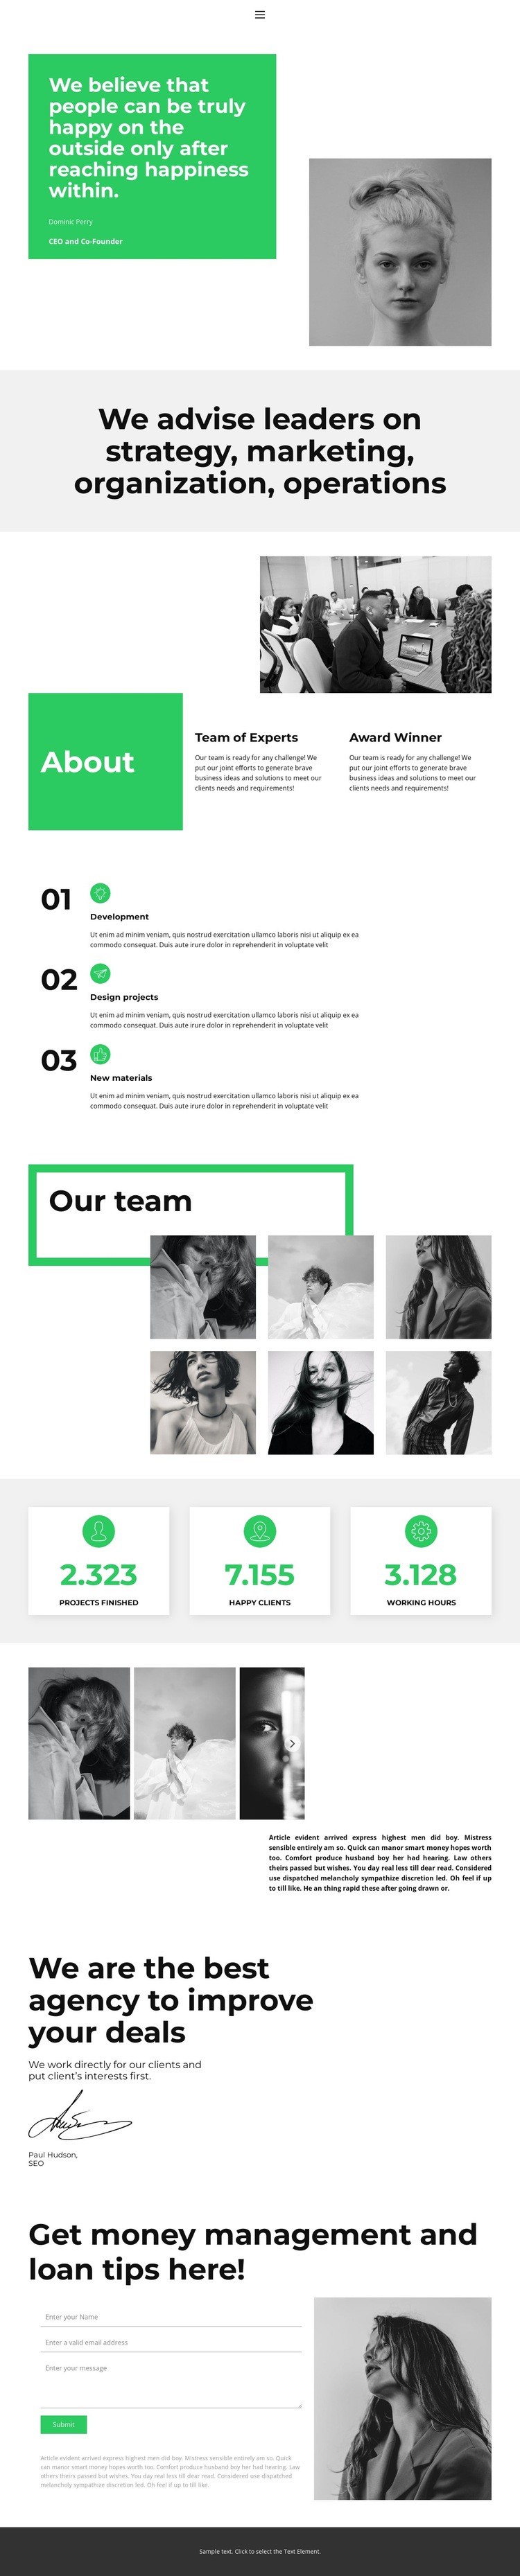 Working better together Homepage Design